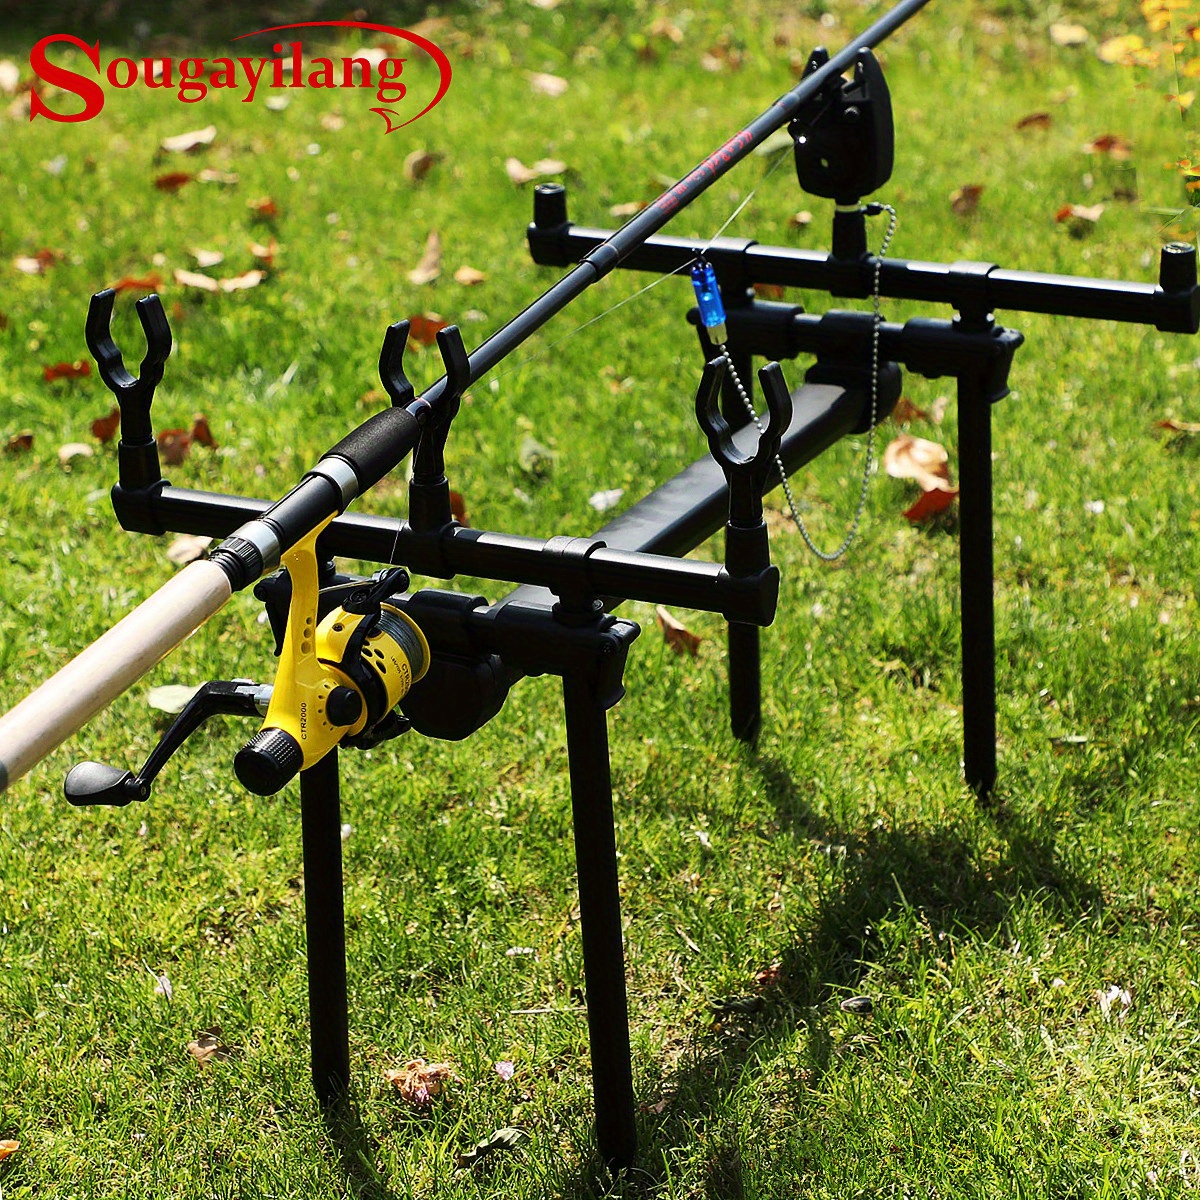 

Sougayilang Foldable Fishing Rod Stand: 3 U-shaped Ground Stands, Multi-purpose, Suitable For Valentine's Day, Thanksgiving, Christmas, Halloween, New Year, And More - Made Of Stainless Steel